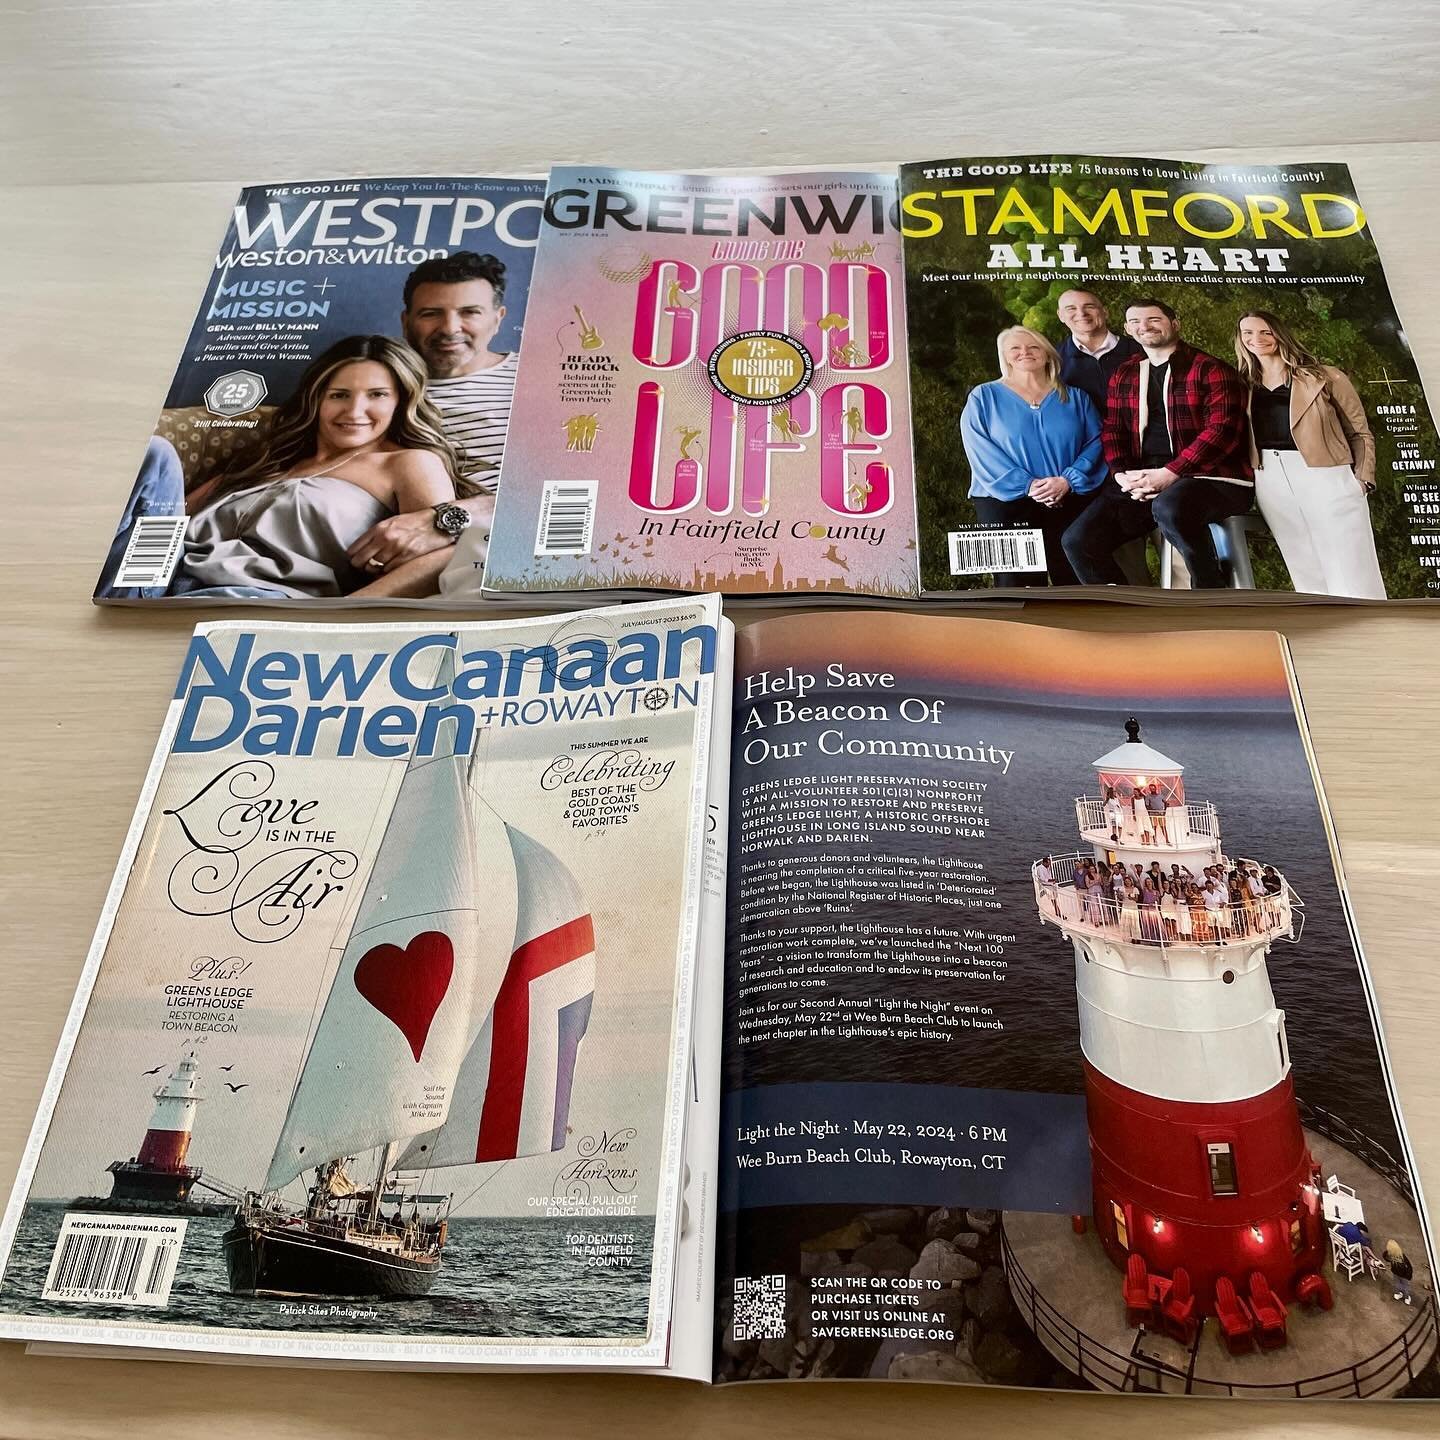 Look for our Light the Night 2024 announcement in this month&rsquo;s Moffly community magazines! 🌟

New Canaan Darien + Rowayton Magazine (@ncdmag)
Greenwich Magazine (@greenwichmag)
Westport Magazine (@westportmagazine)
and Stamford Magazine (@stam